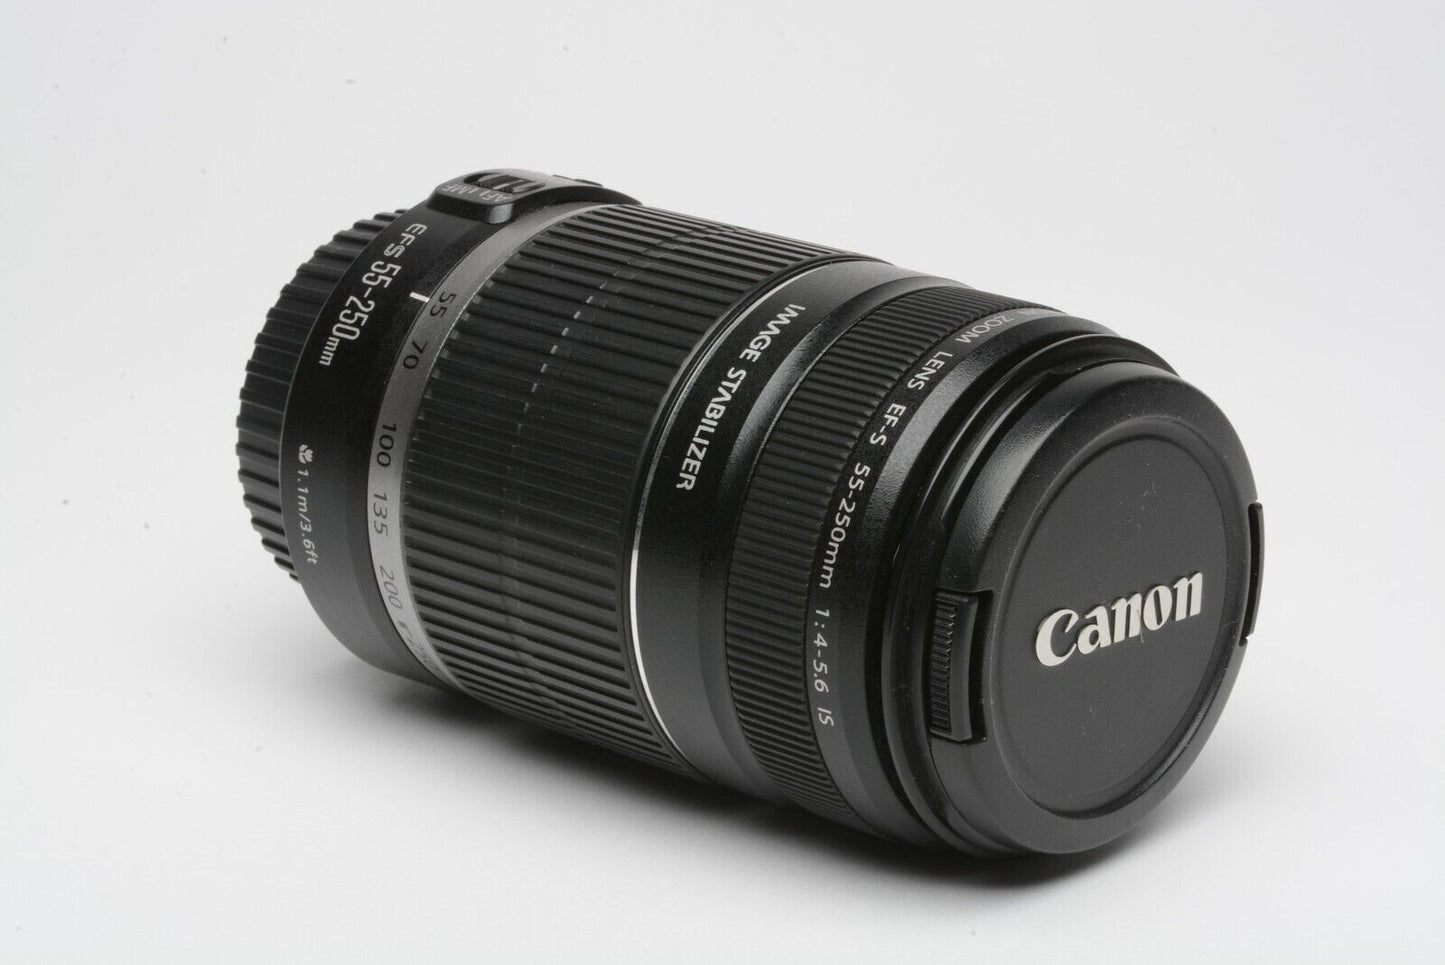 MINT- CANON EF-S 55-250mm f4-5.6 IS ZOOM LENS, CAPS, VERY CLEAN